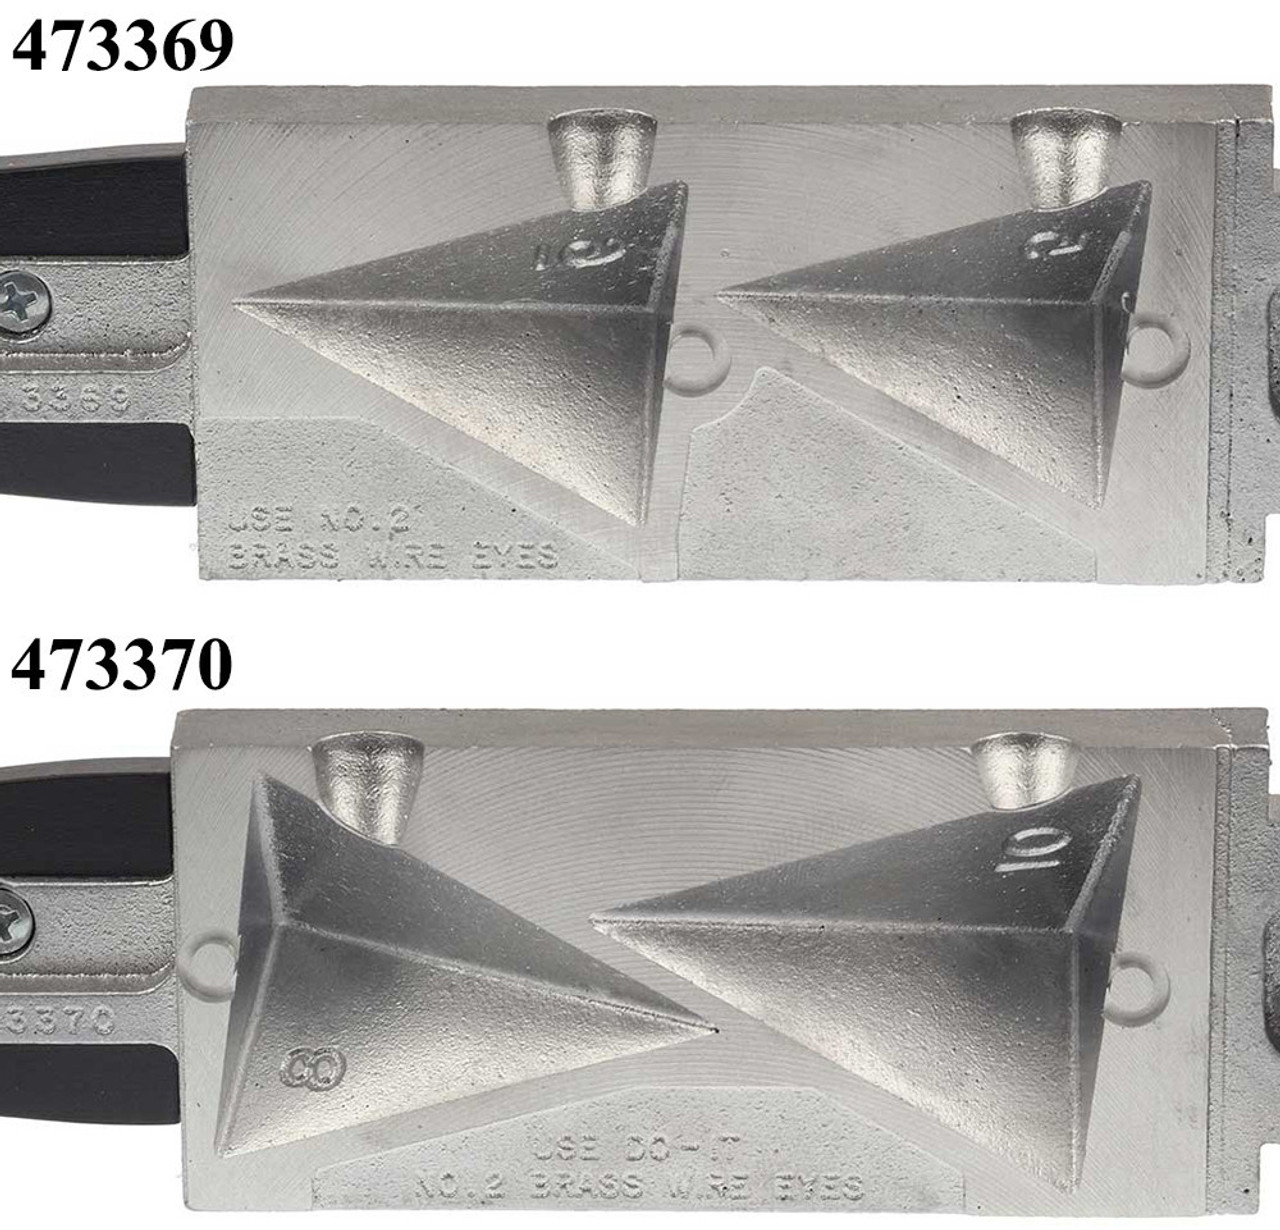 Do-It Pyramid Sinker Molds - Barlow's Tackle